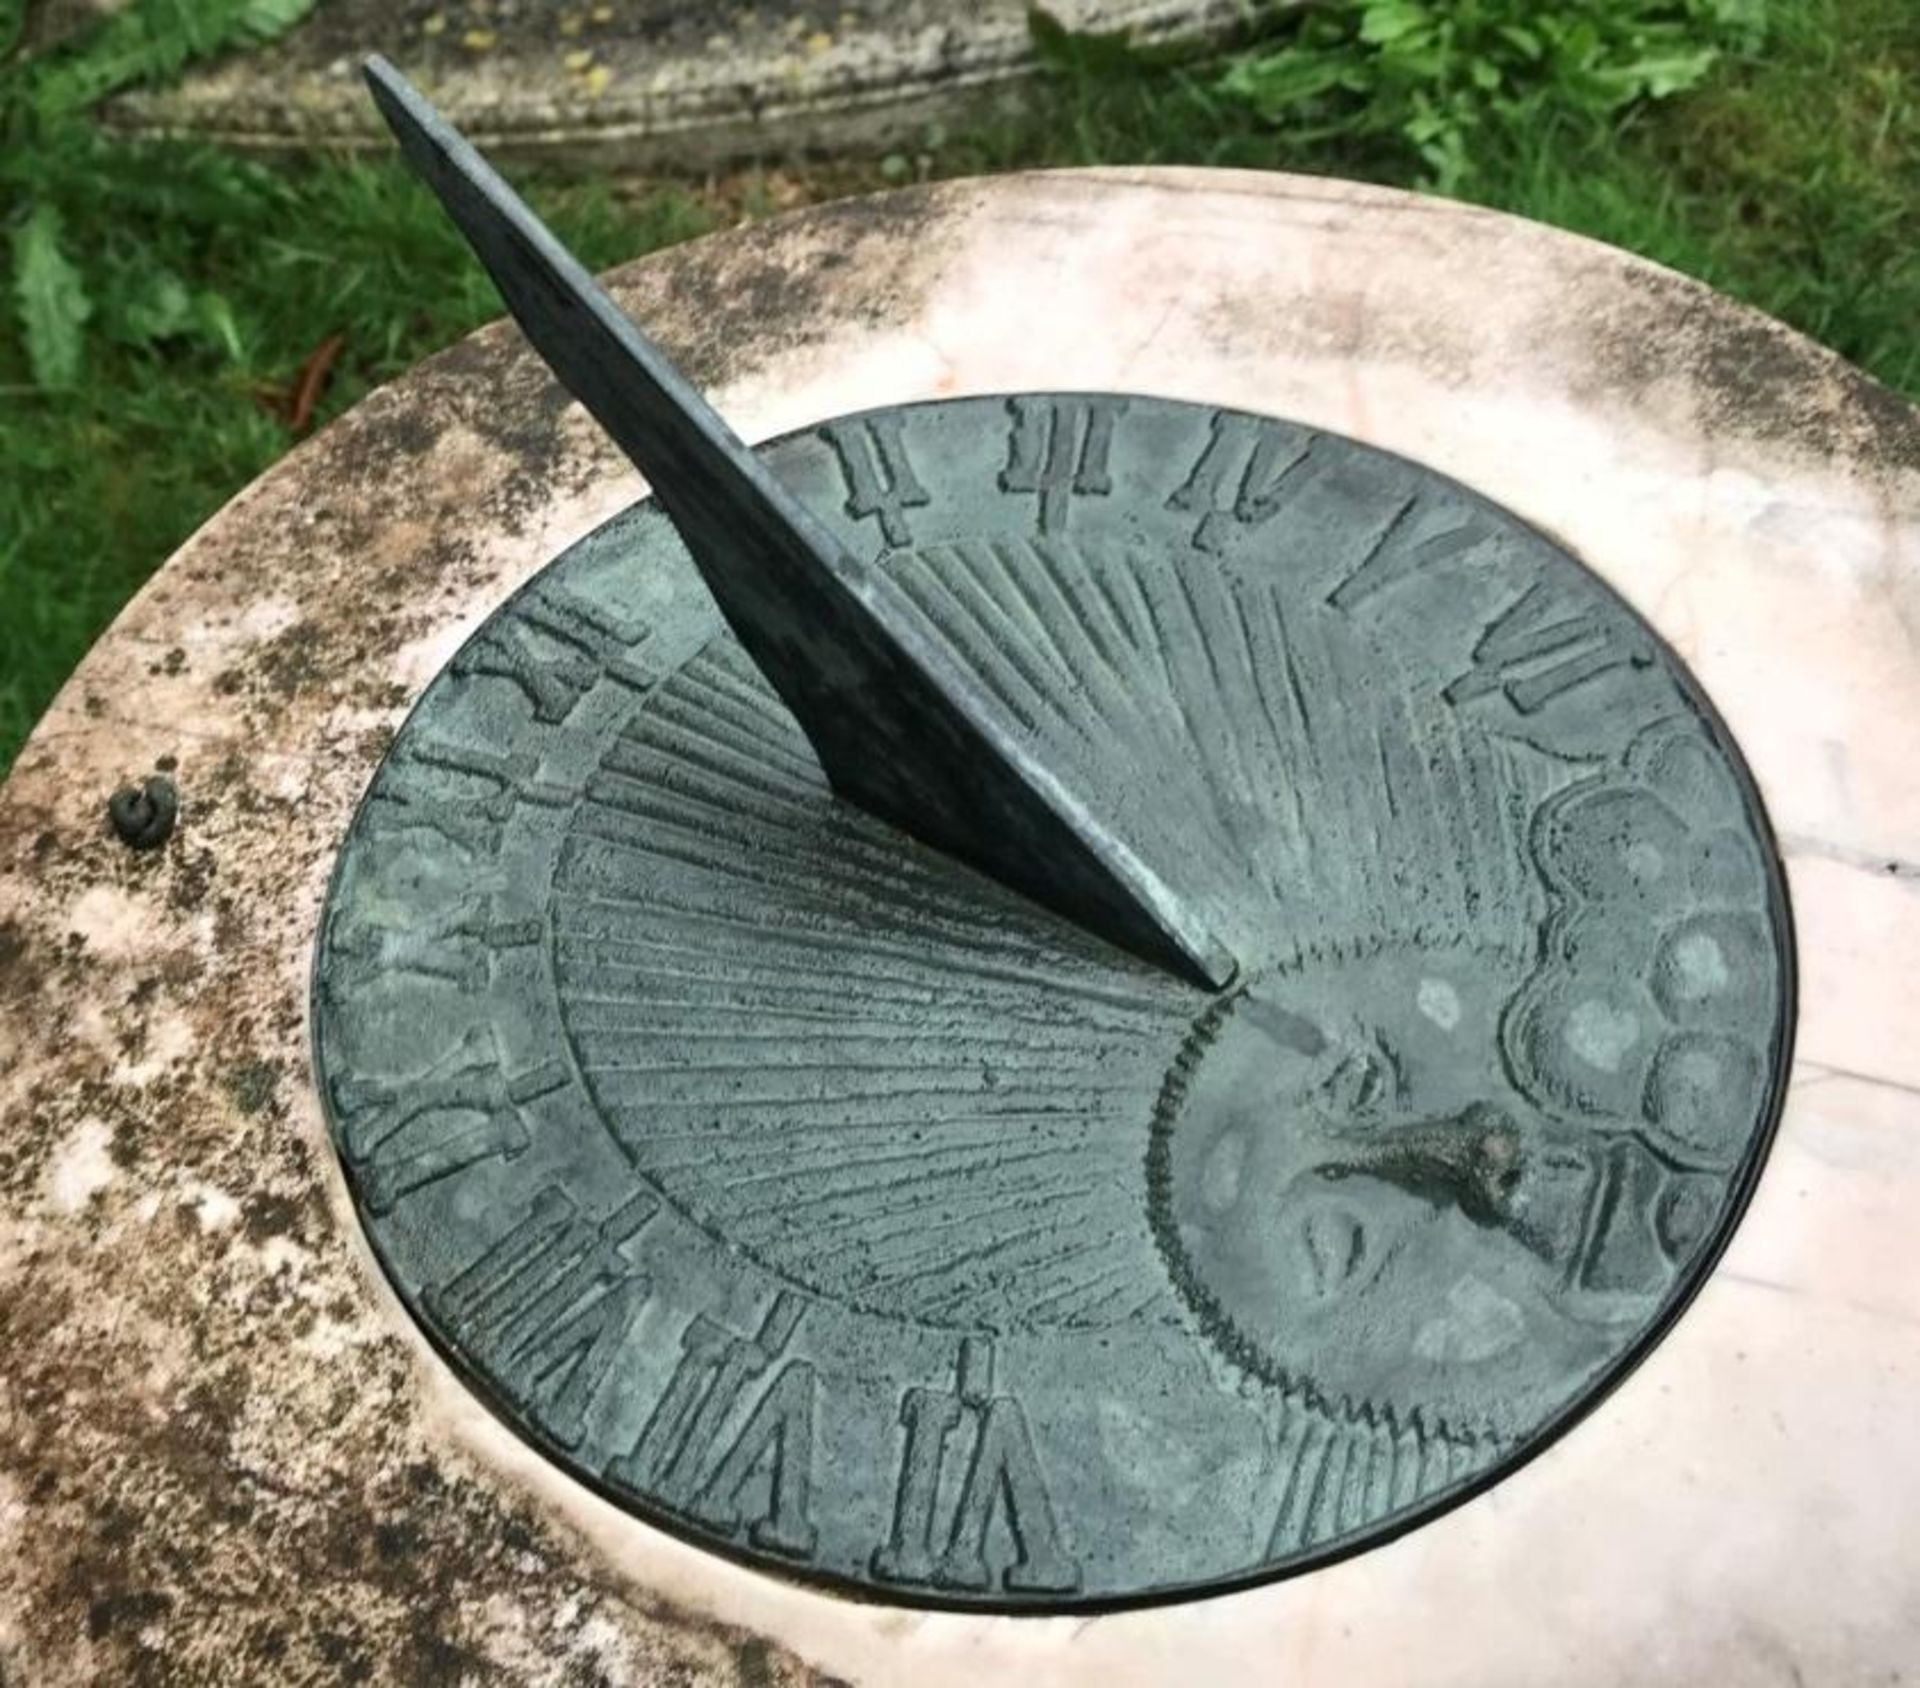 1 x Solstice Stone Sundial Shaped Pedestal With Dial Plate - Measurements Height 84cm x Diameter - Image 8 of 8